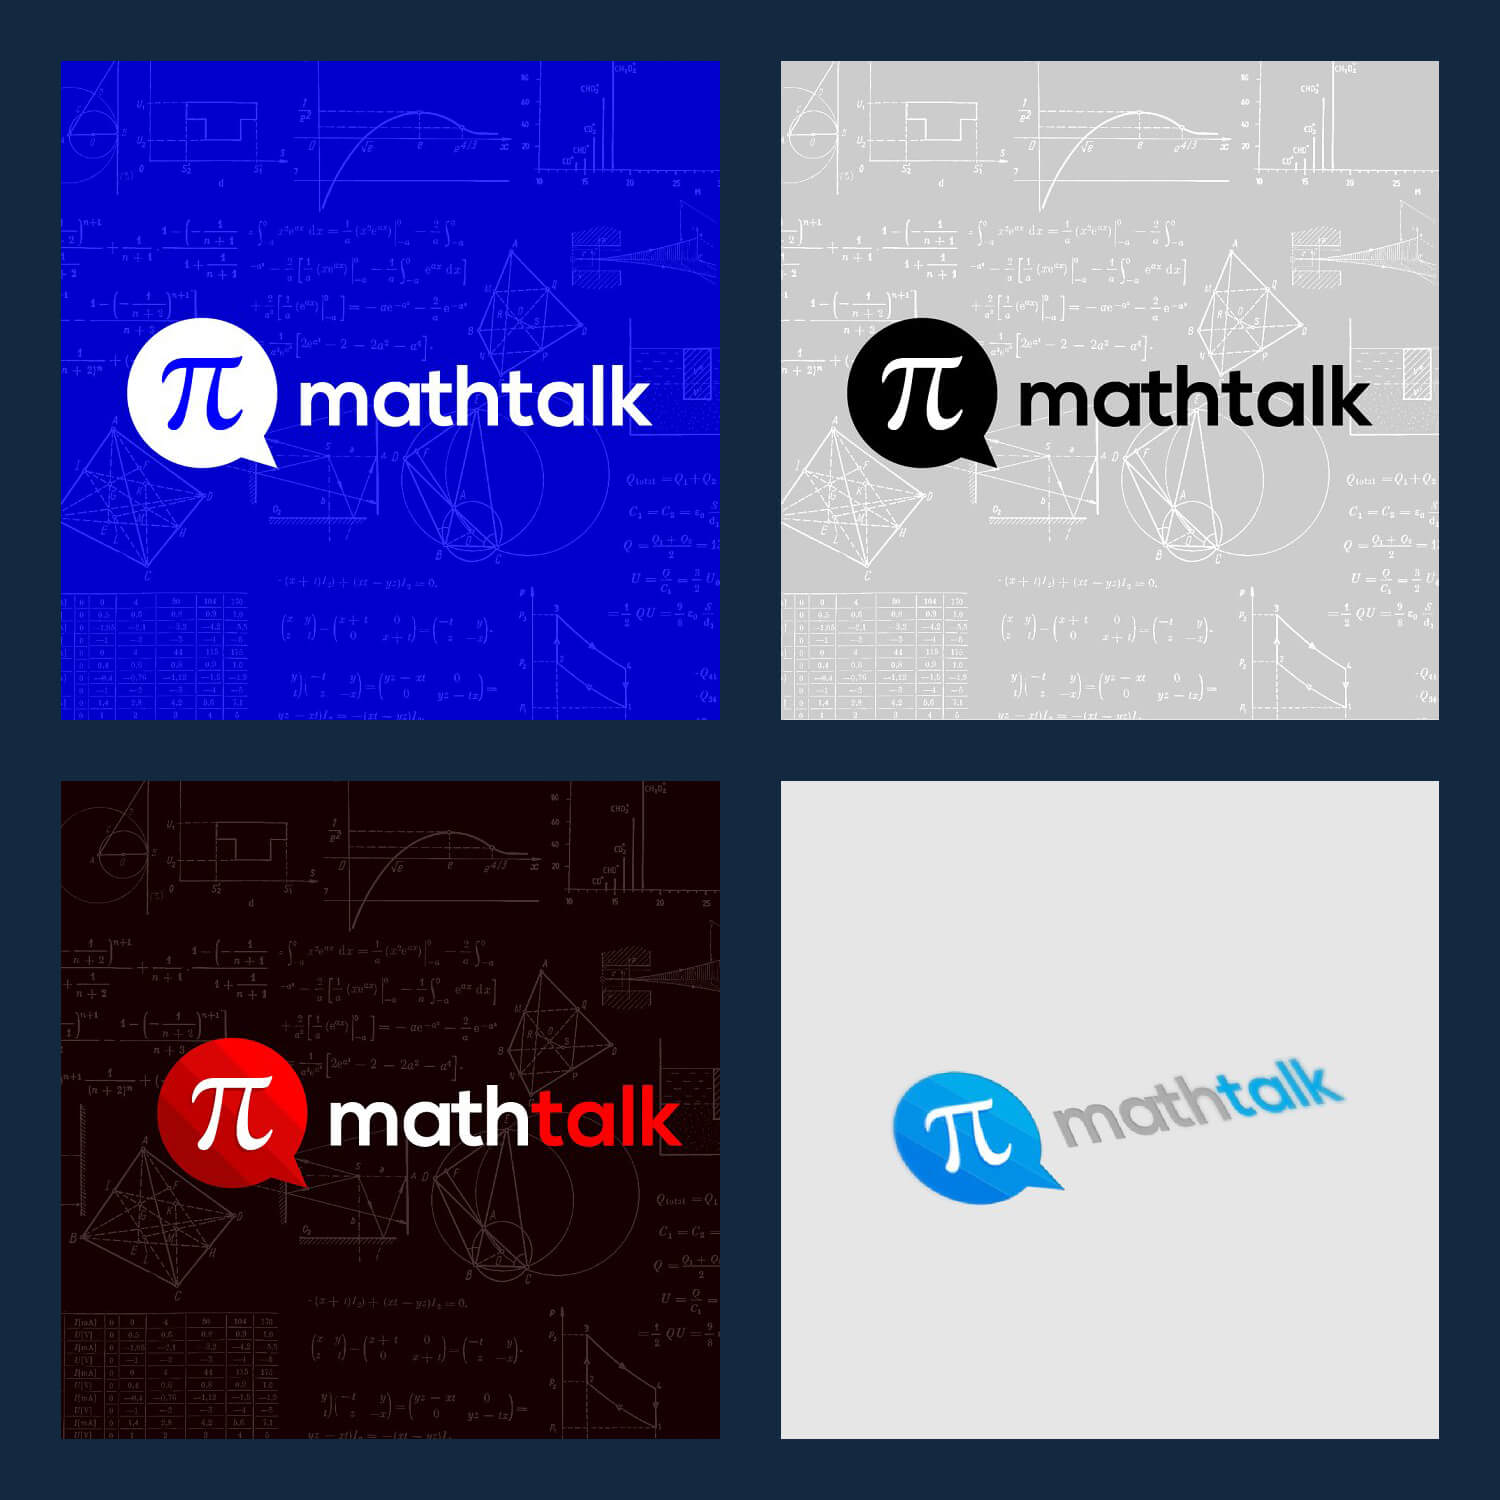 Mathtalk logos in white, black, red-white, blue-gray in square frames inside a large square.